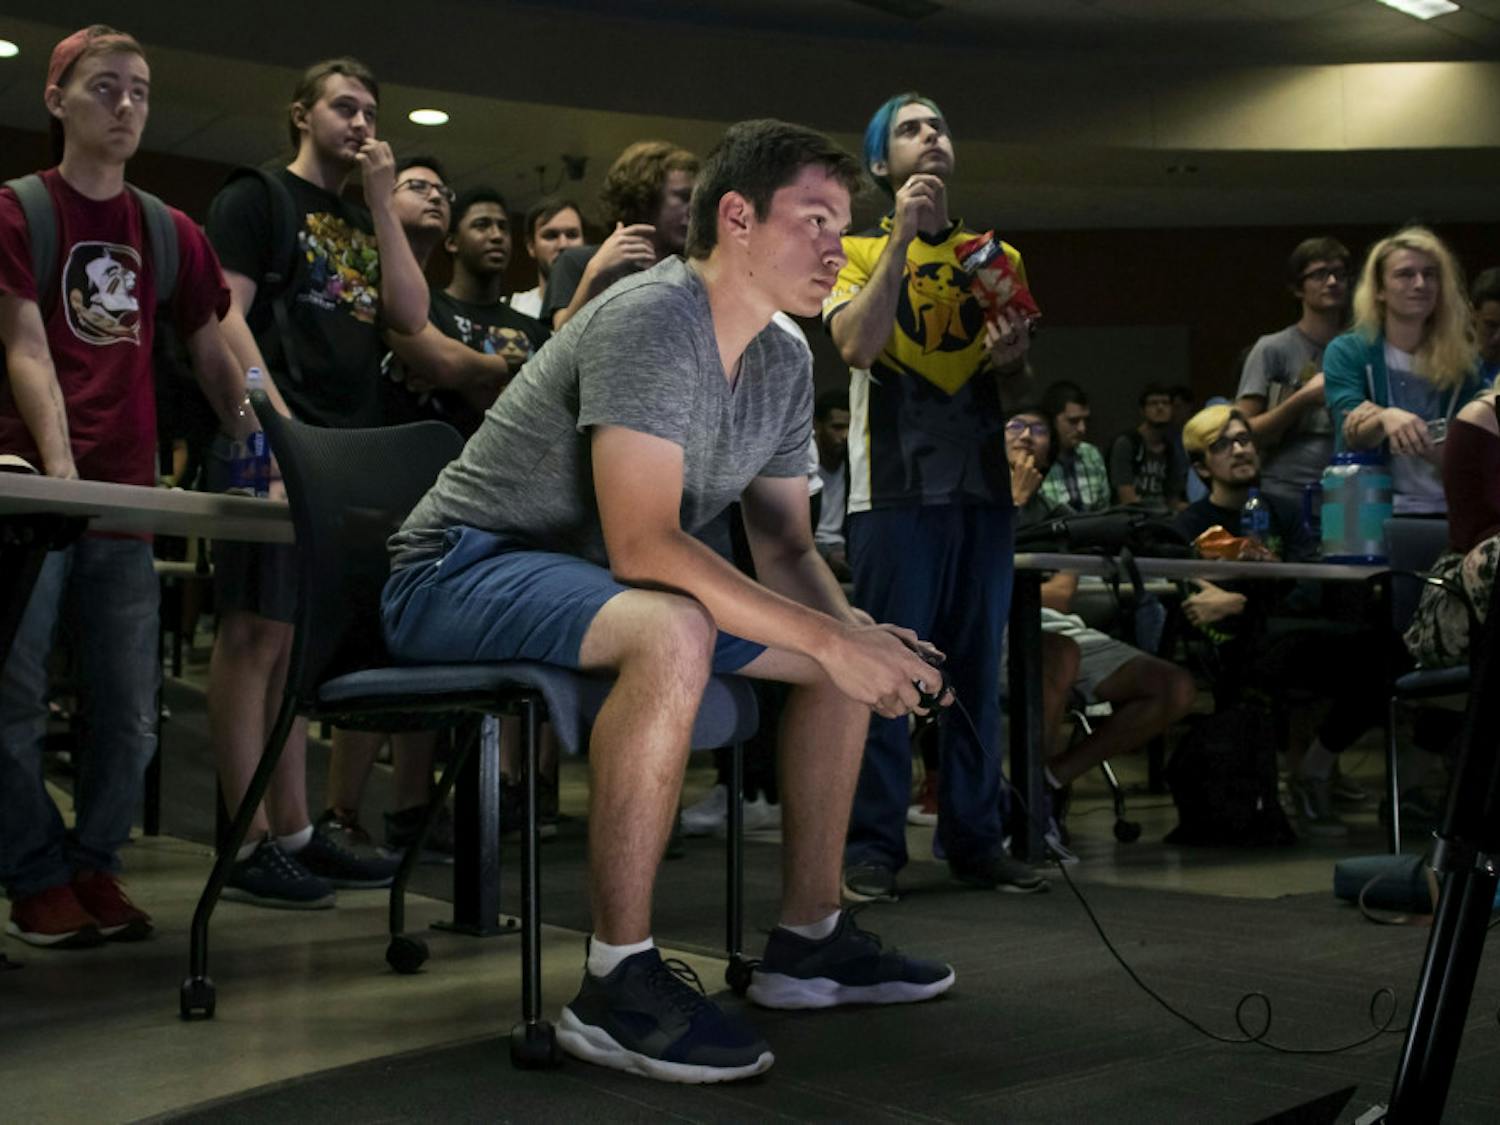  Ryan Erickson, a 19-year-old electrical engineering student, plays Super Smash Bros. Ultimate Friday night during a tournament held in Turlington. Erickson, who goes by the gamertag “Poet,” is one of Gainesville’s top competitive Smash players and is currently ranked as the 4th best player in North Florida. He has competed in local, statewide and nationwide tournaments.